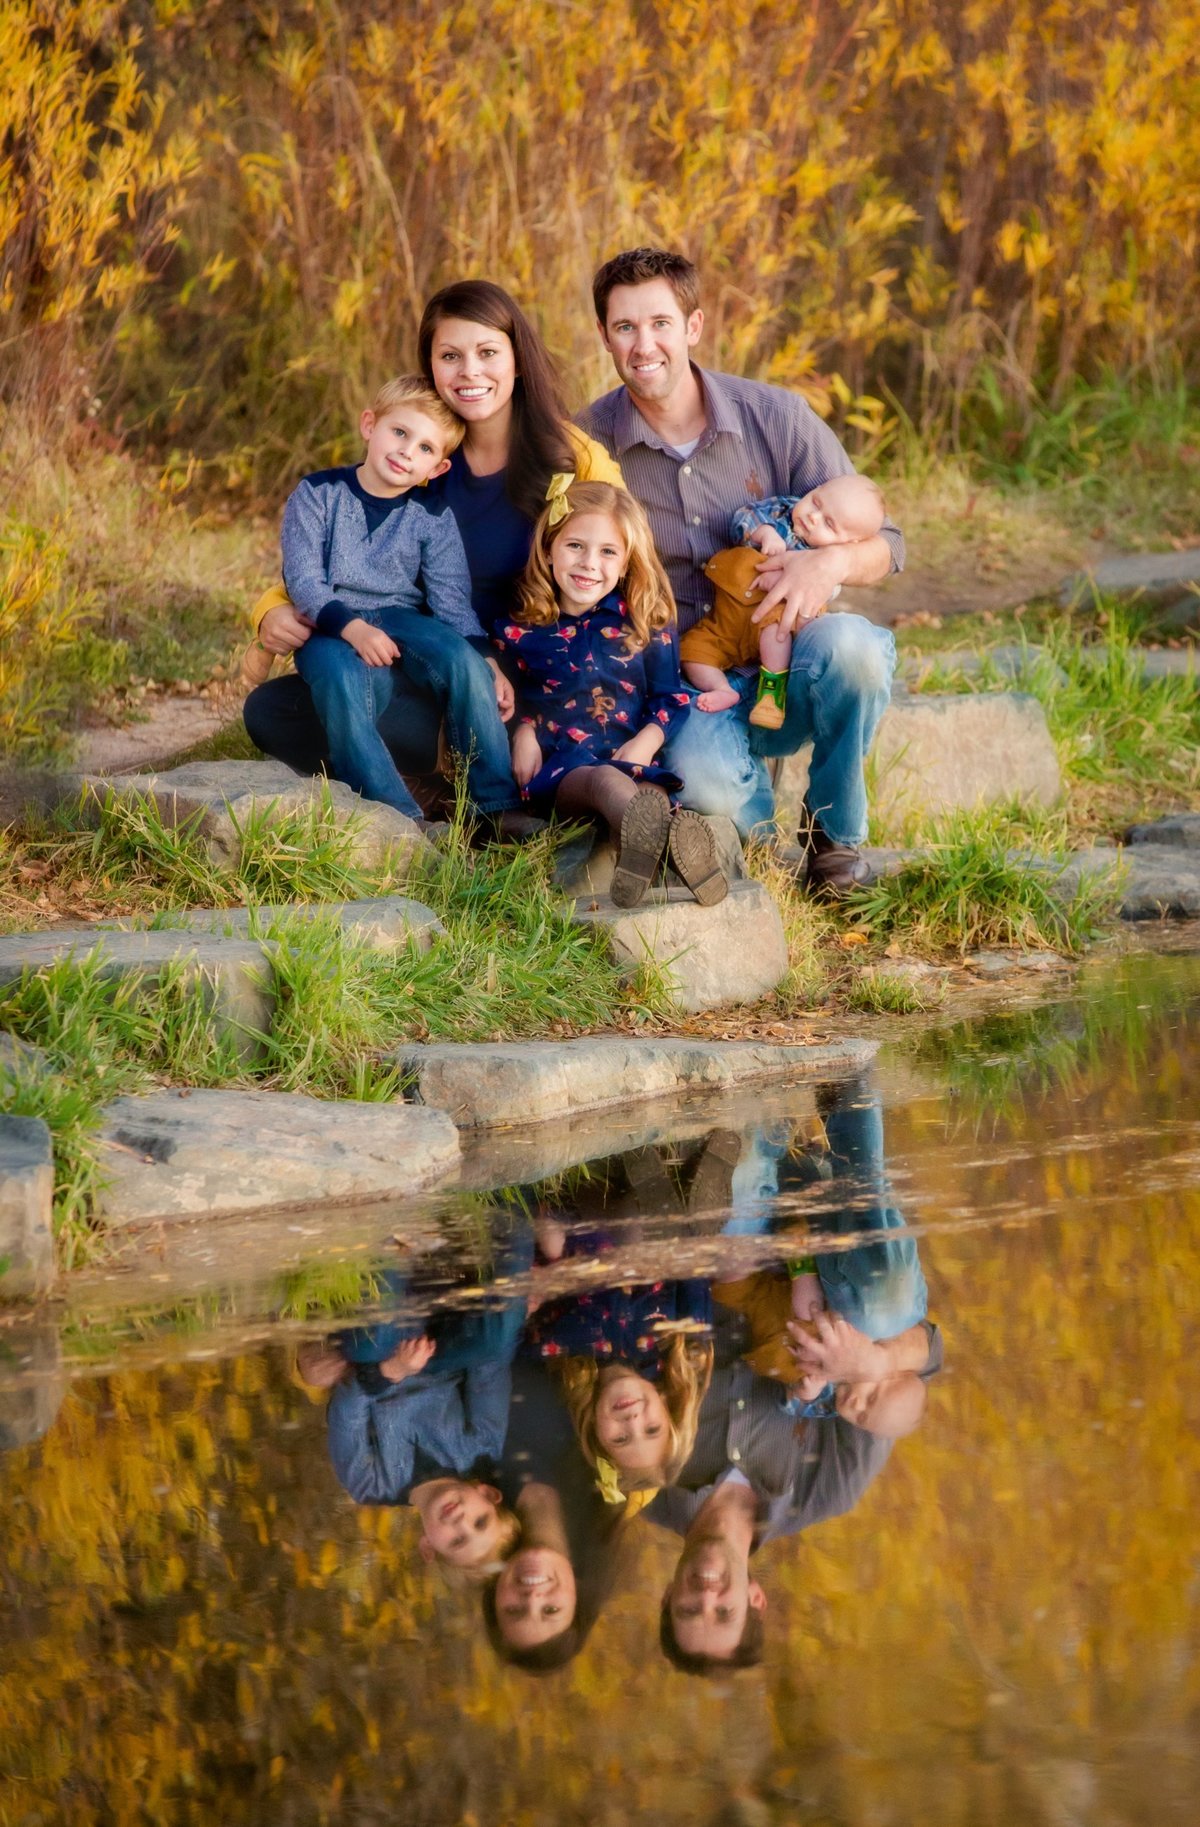 A reflection picture of a family sitting together next to the Laramie River in the fall.